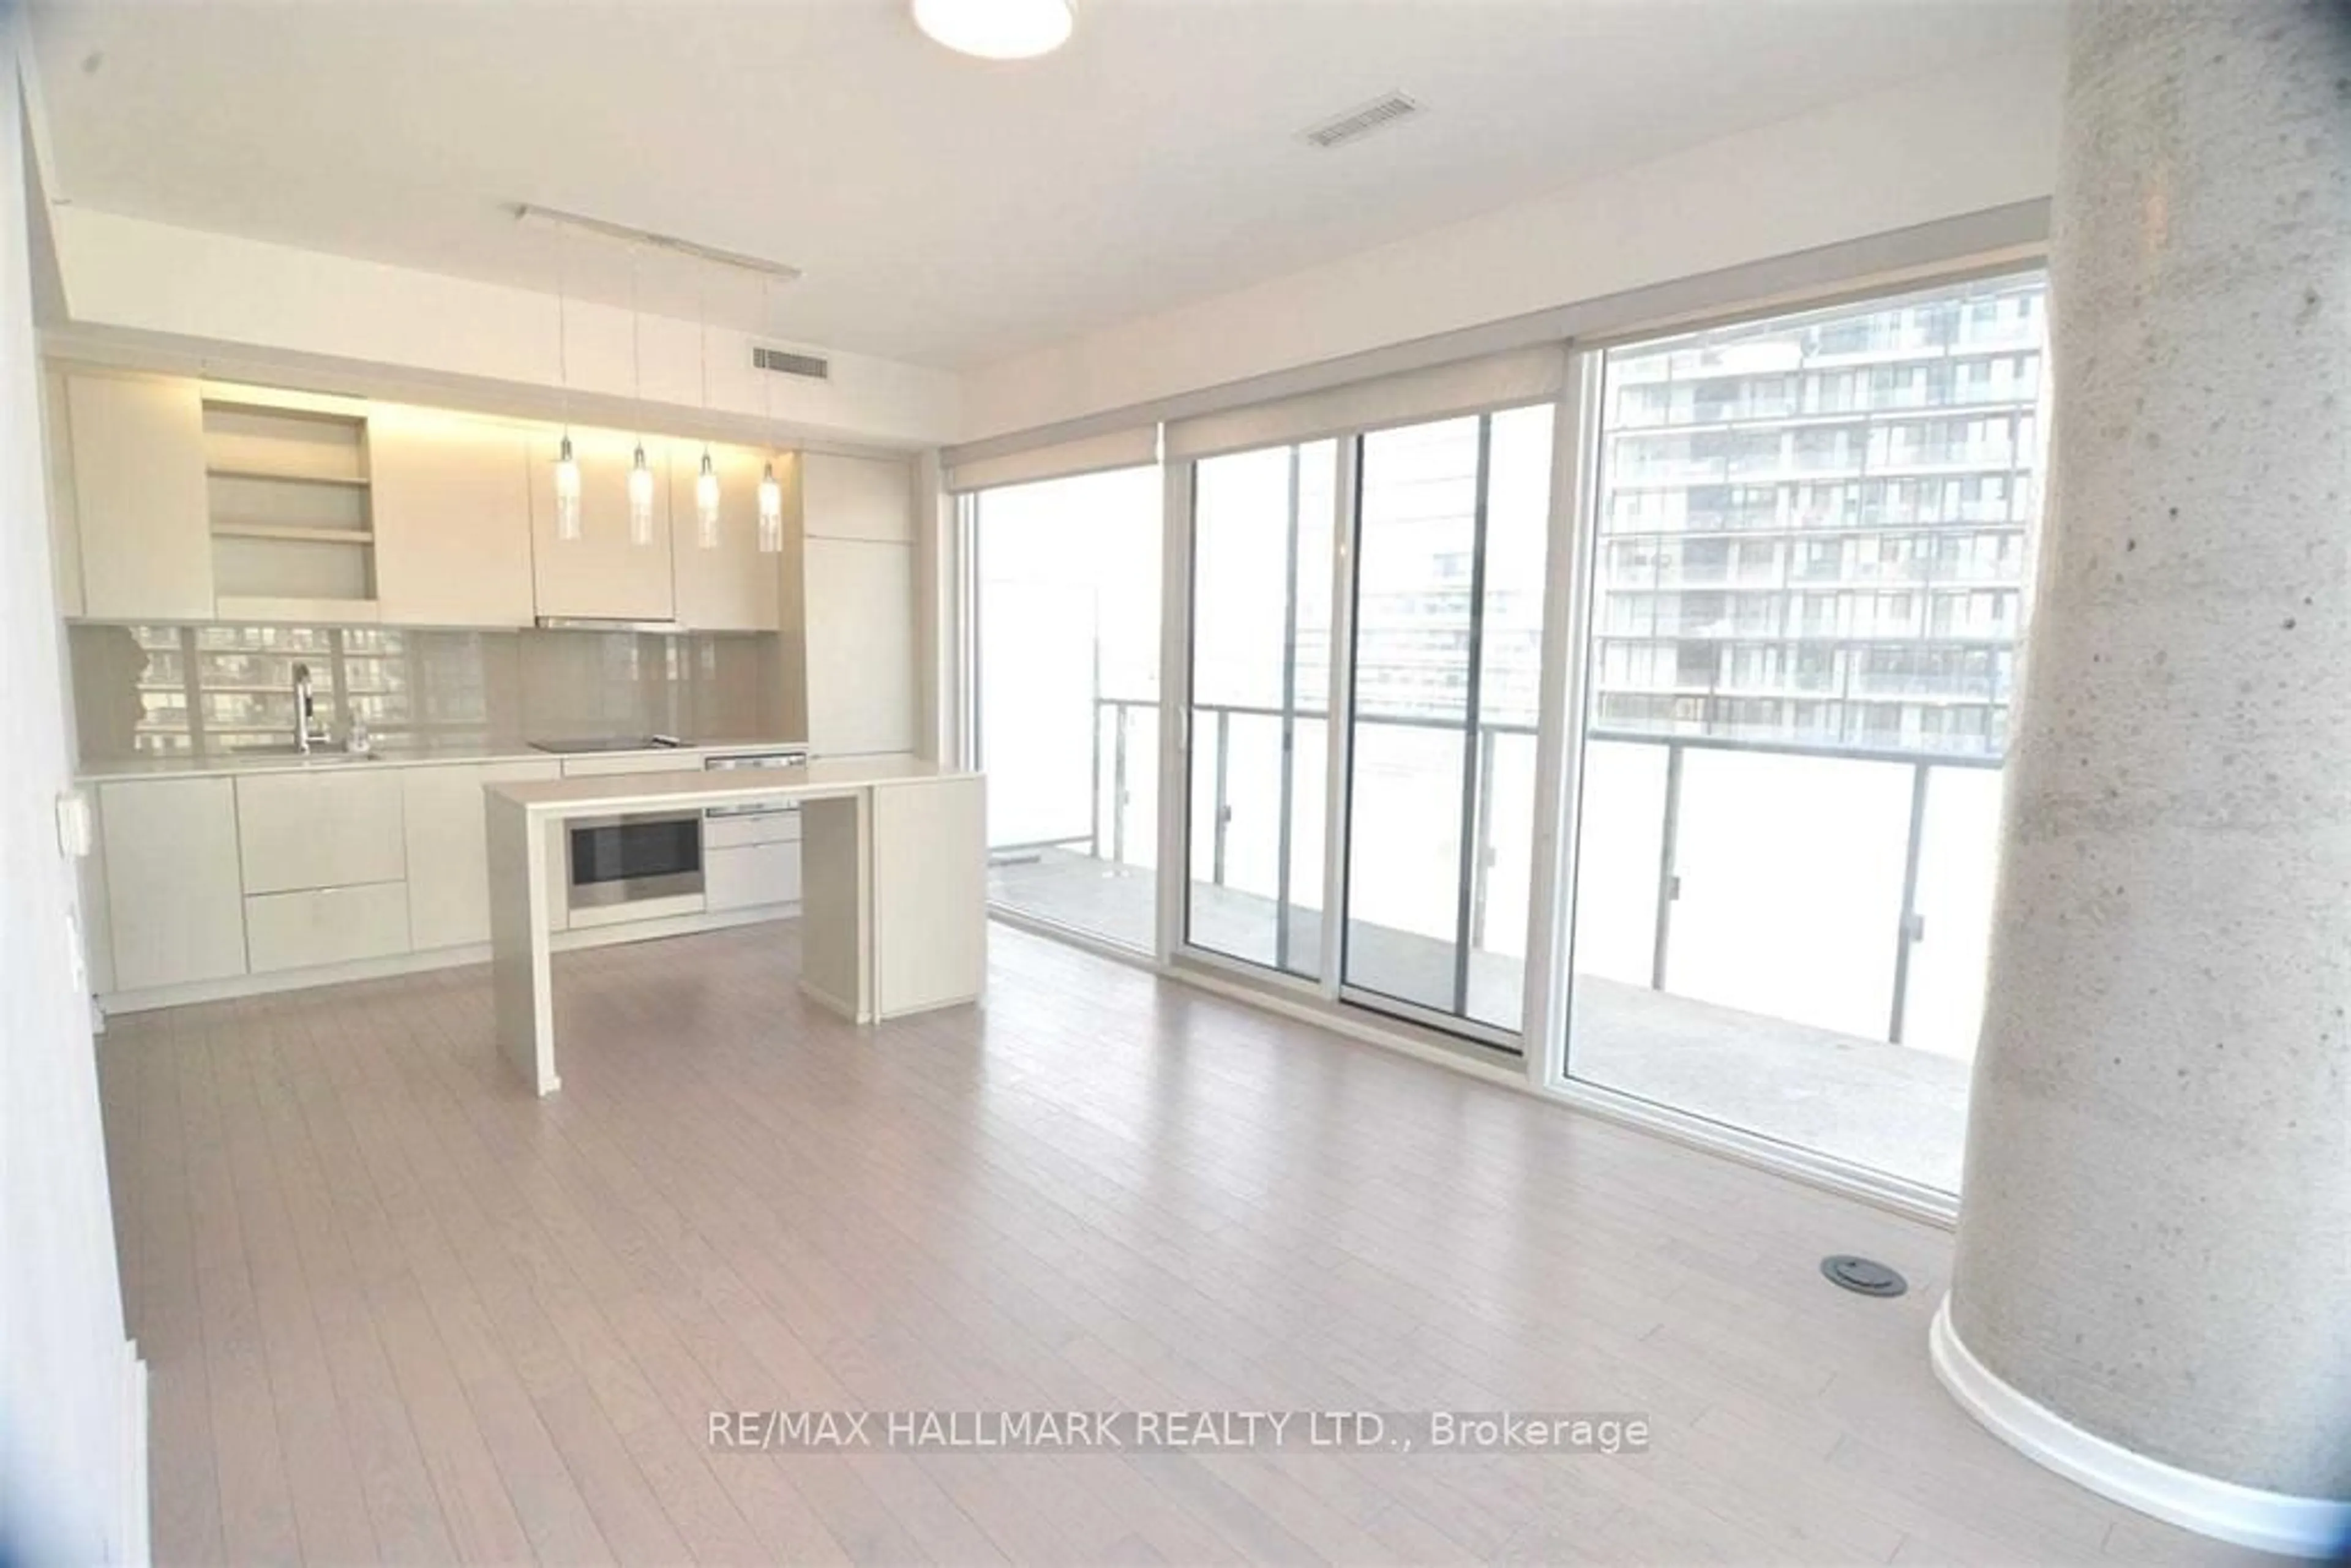 Other indoor space for 101 Peter St #1403, Toronto Ontario M5V 2G9